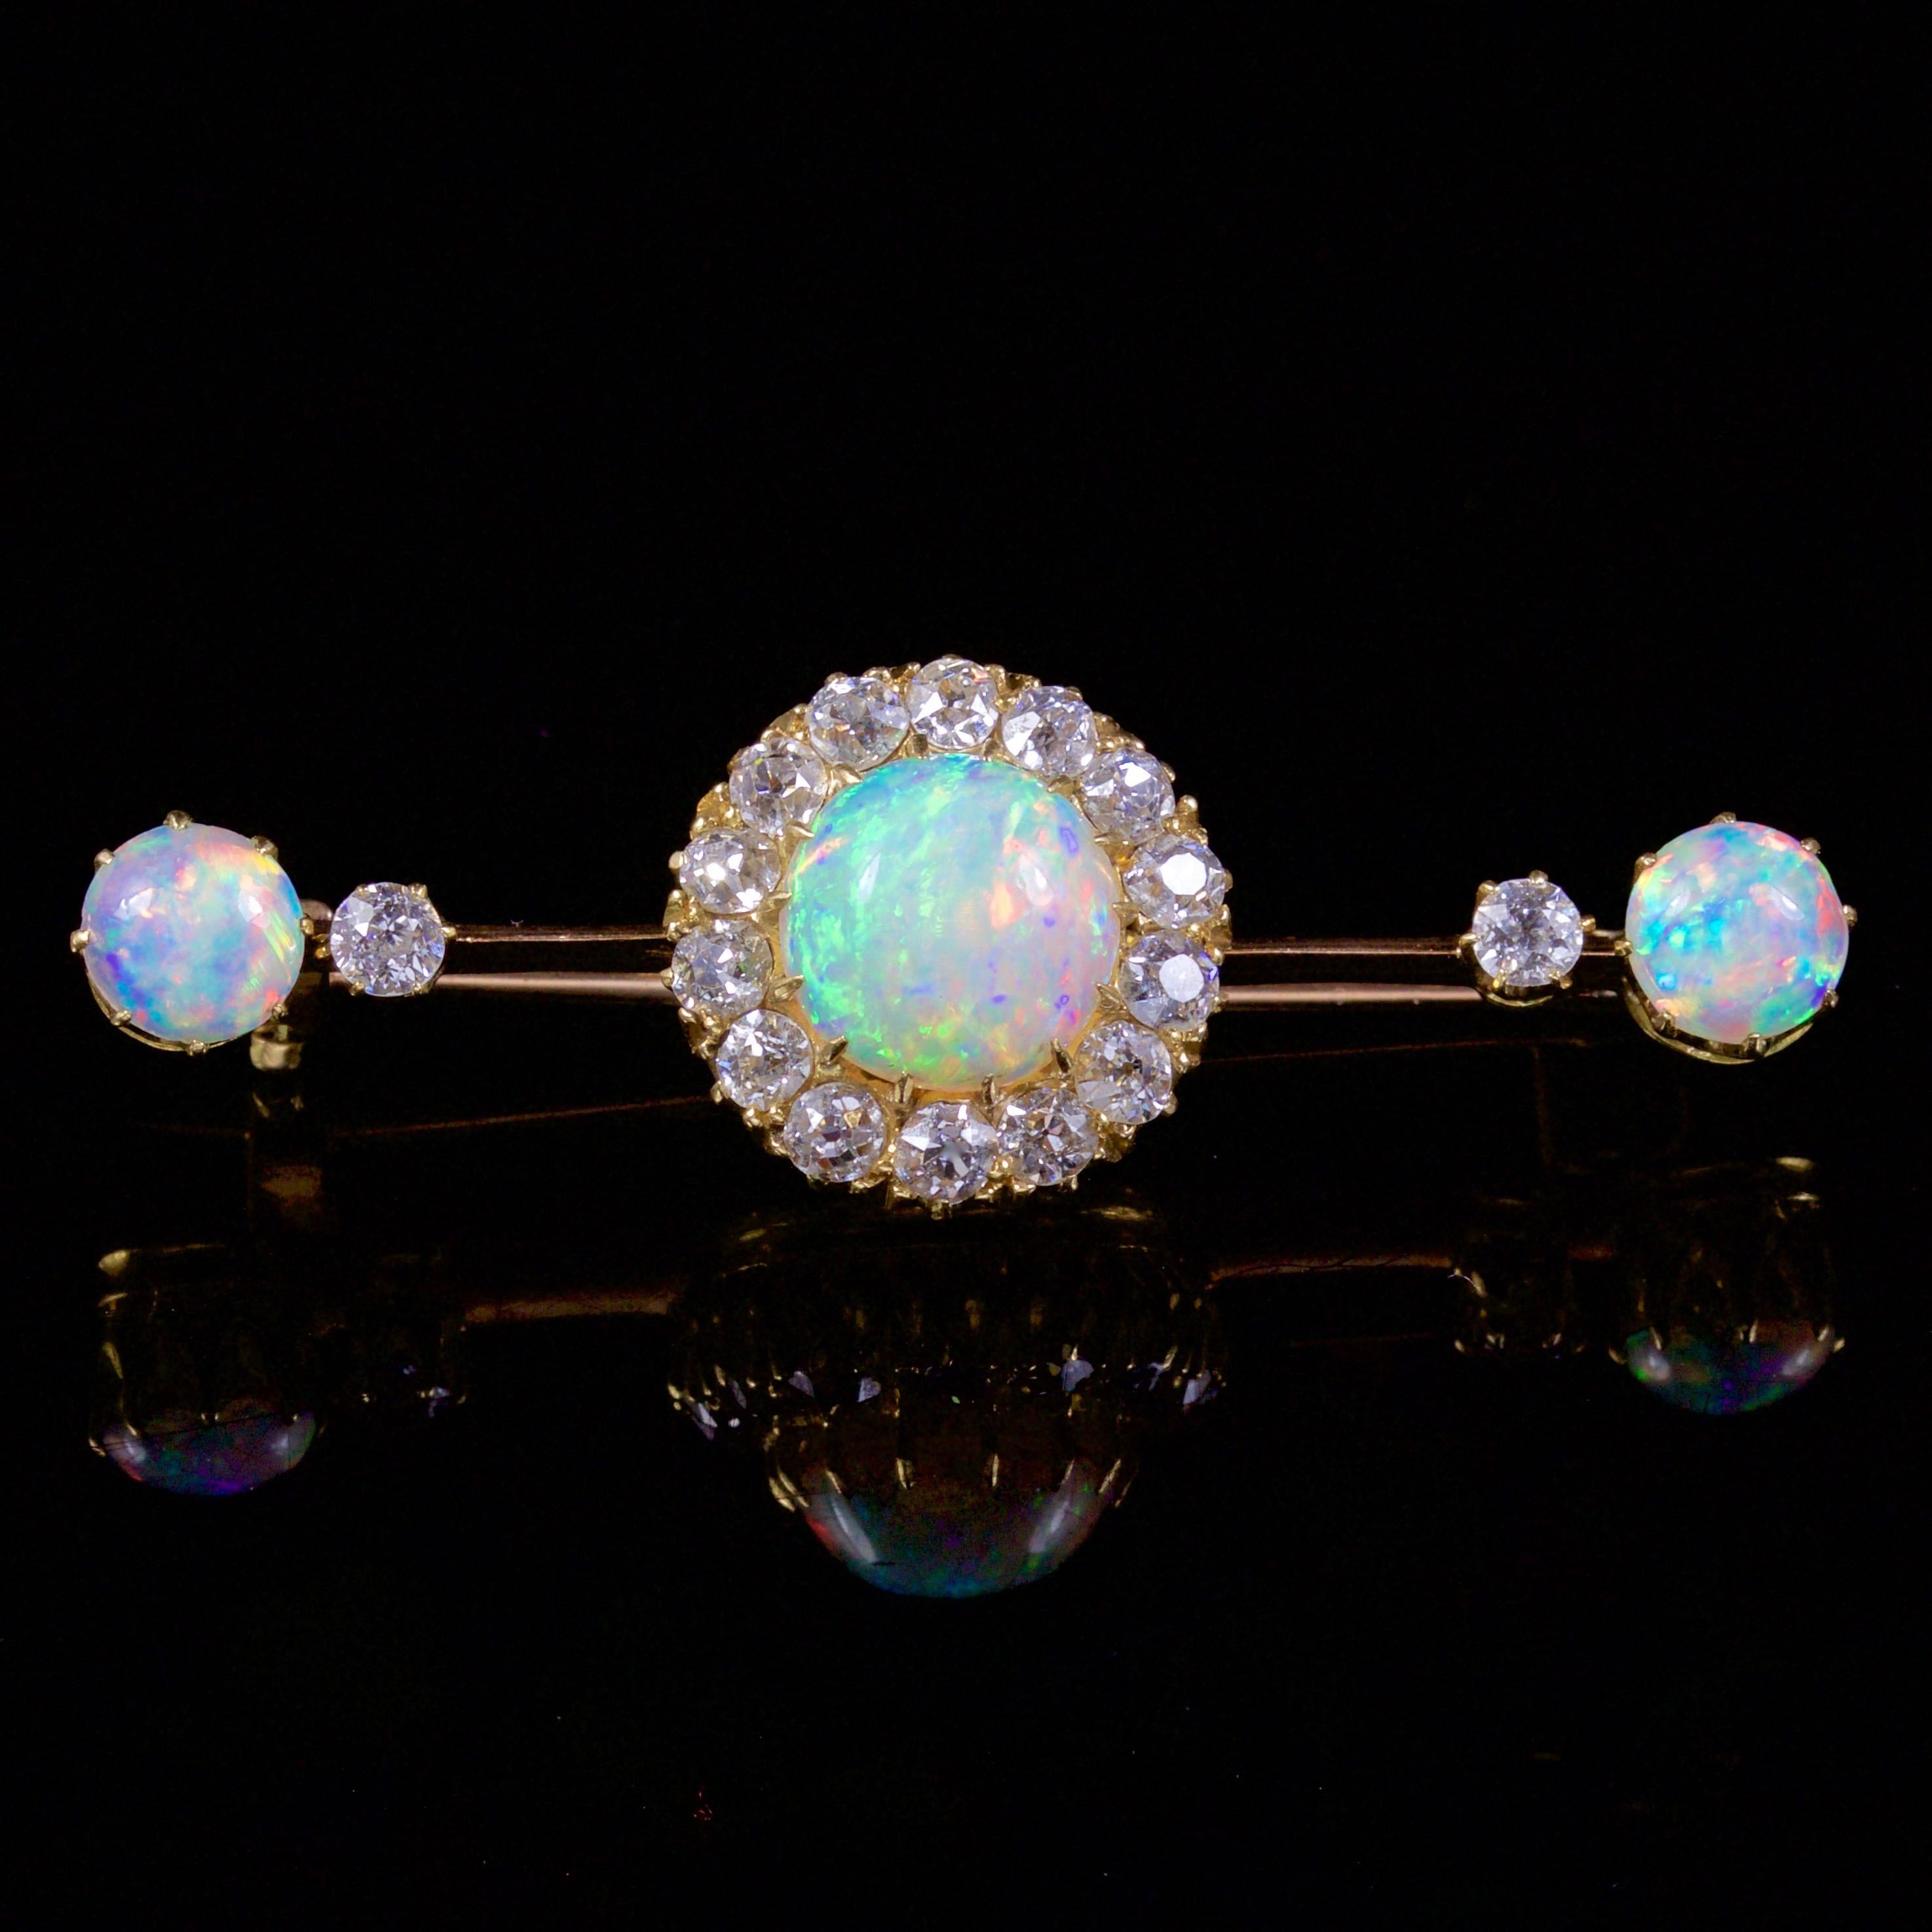 This incredible Victorian 18ct Yellow Gold Opal and Diamond brooch is, Circa 1880.

The brooch is adorned in a large 2ct natural Opal that shows a wonderful hue from within.

The lovely natural Opal is a kaleidoscope of rainbow colours shimmering